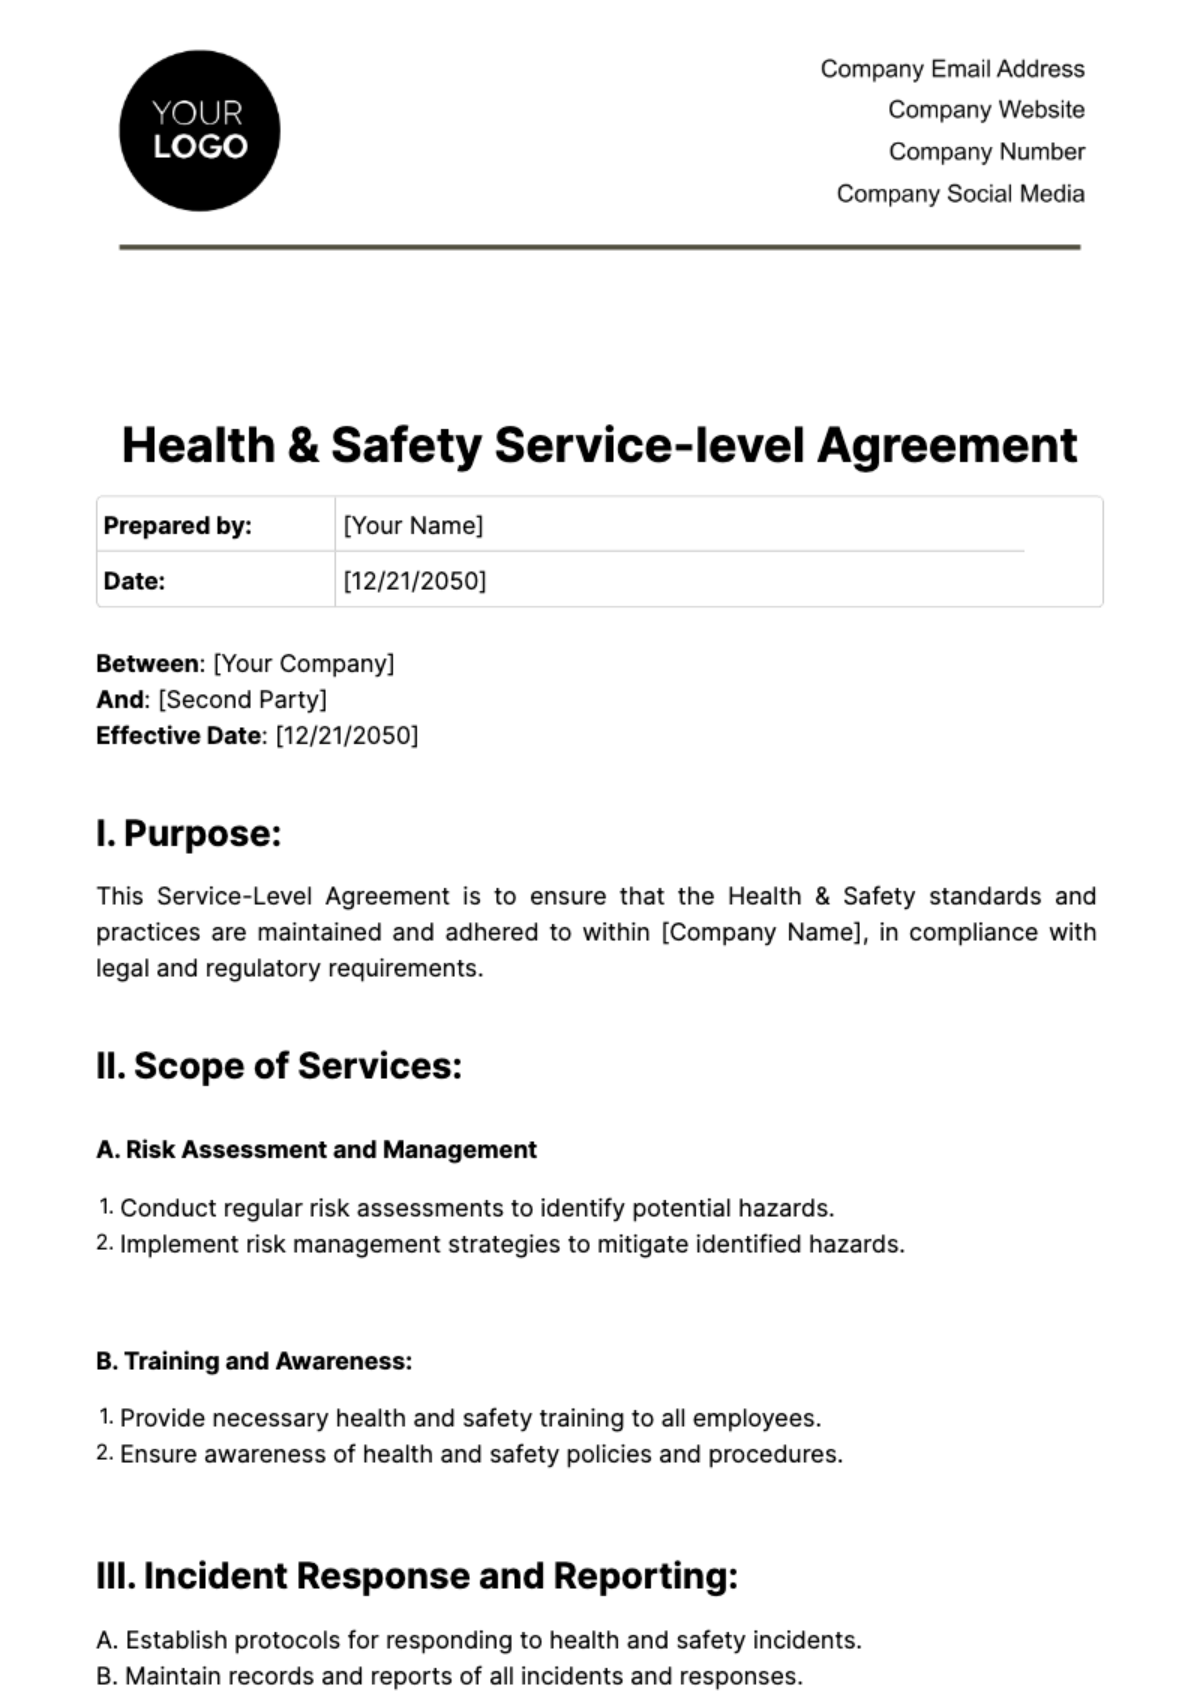 Health & Safety Service-level Agreement Template